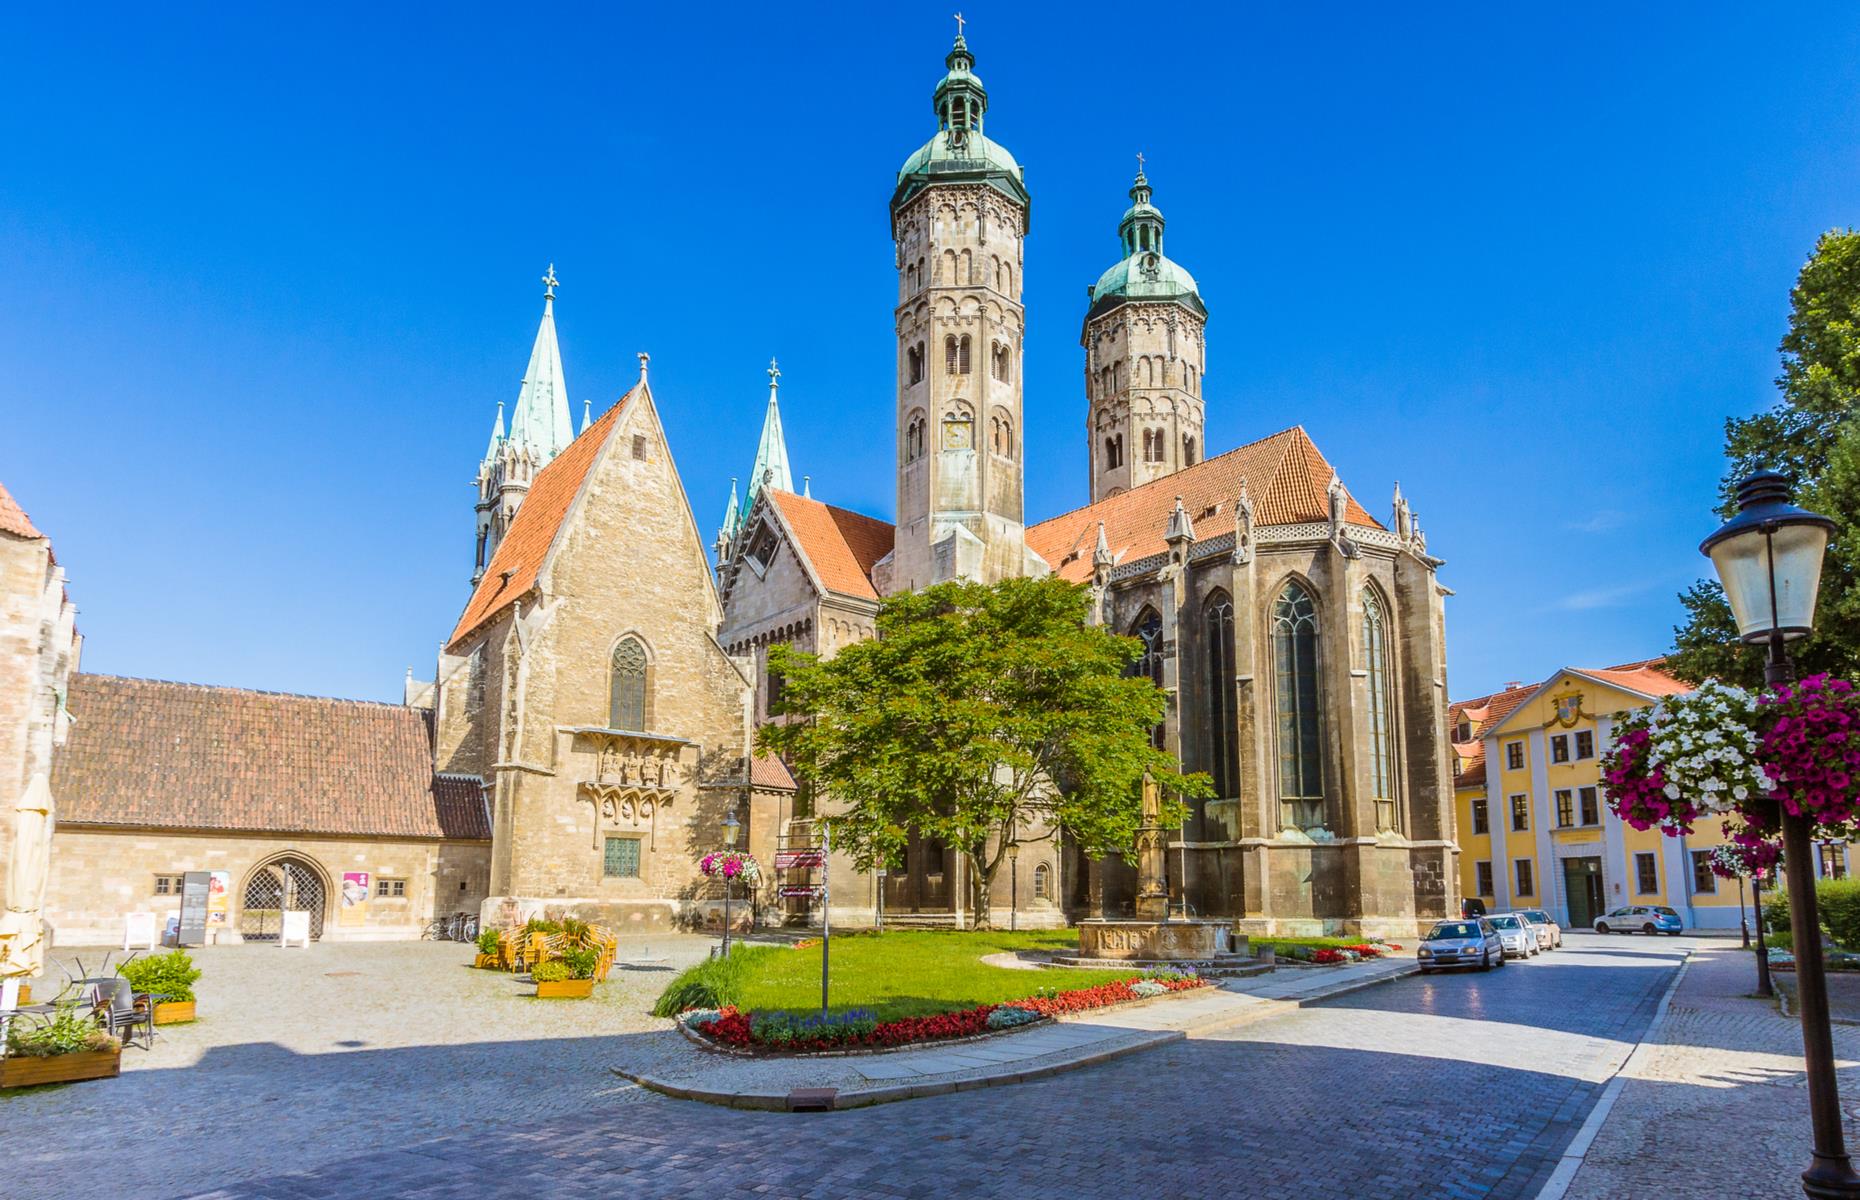 <p>The dramatic spires of this 11th-century cathedral can be seen from pretty much every part of the town of Naumburg, towering above pretty red-roofed buildings and gazing across at surrounding hills and vineyards. The Cathedral of St Peter and St Paul, or <a href="https://www.naumburger-dom.de/en/">Naumburg Cathedral</a>, encompasses Romanesque and Gothic features, and is just as beguiling on the inside. Its choir is dotted with life-size statues of the cathedral’s founders including Uta, described as the most beautiful woman of the Middle Ages.</p>